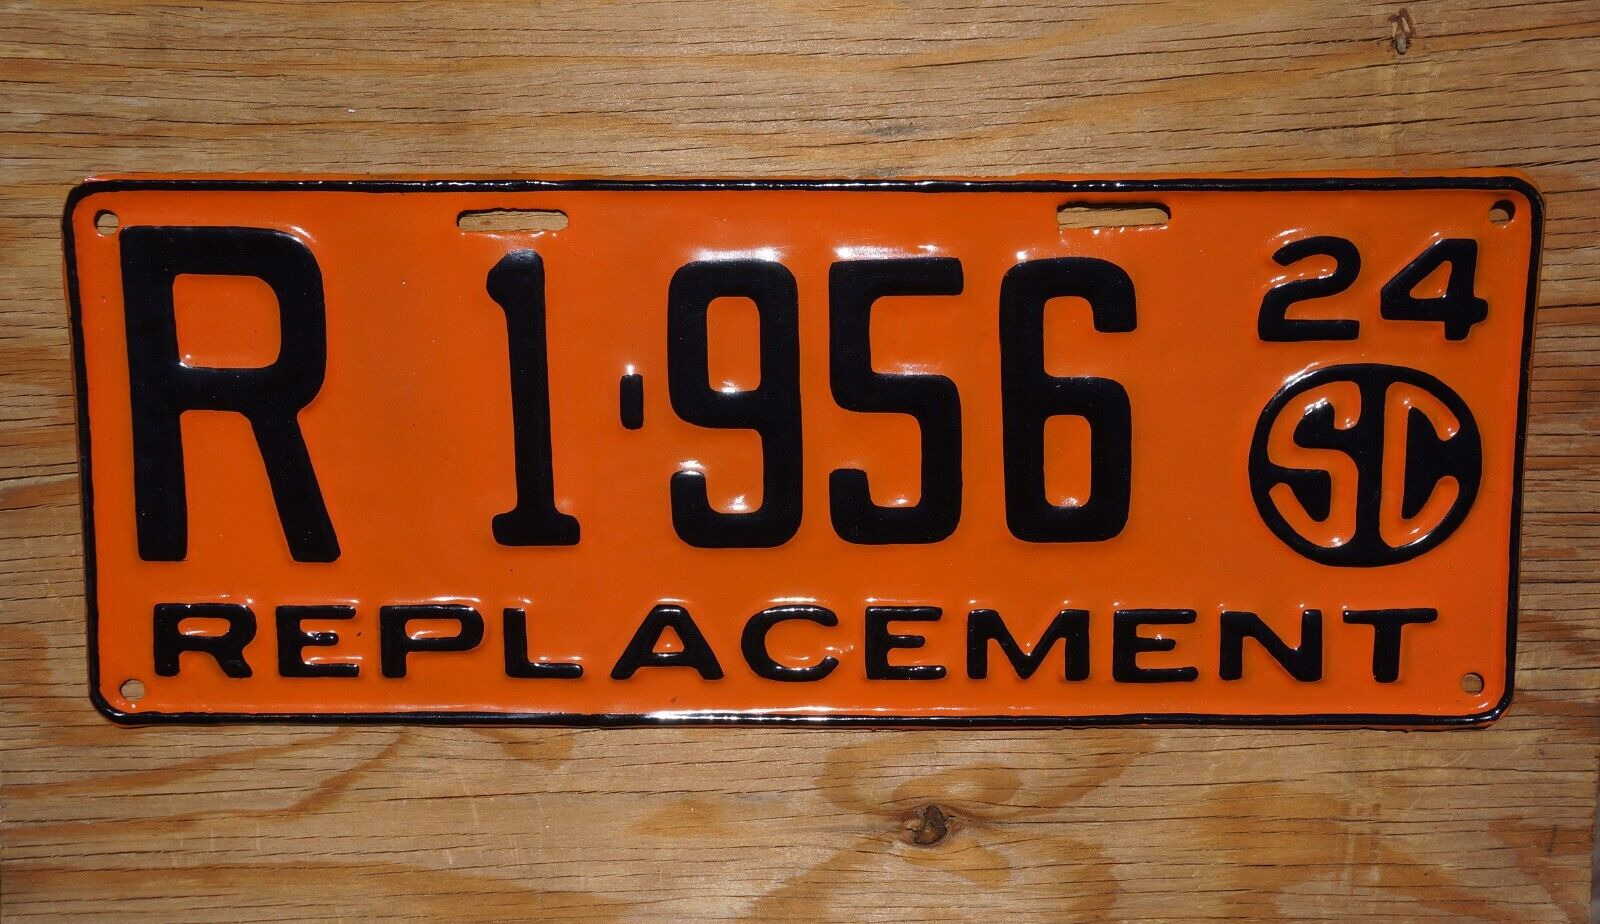 1924 South Carolina REPLACEMENT License Plate # 1-956